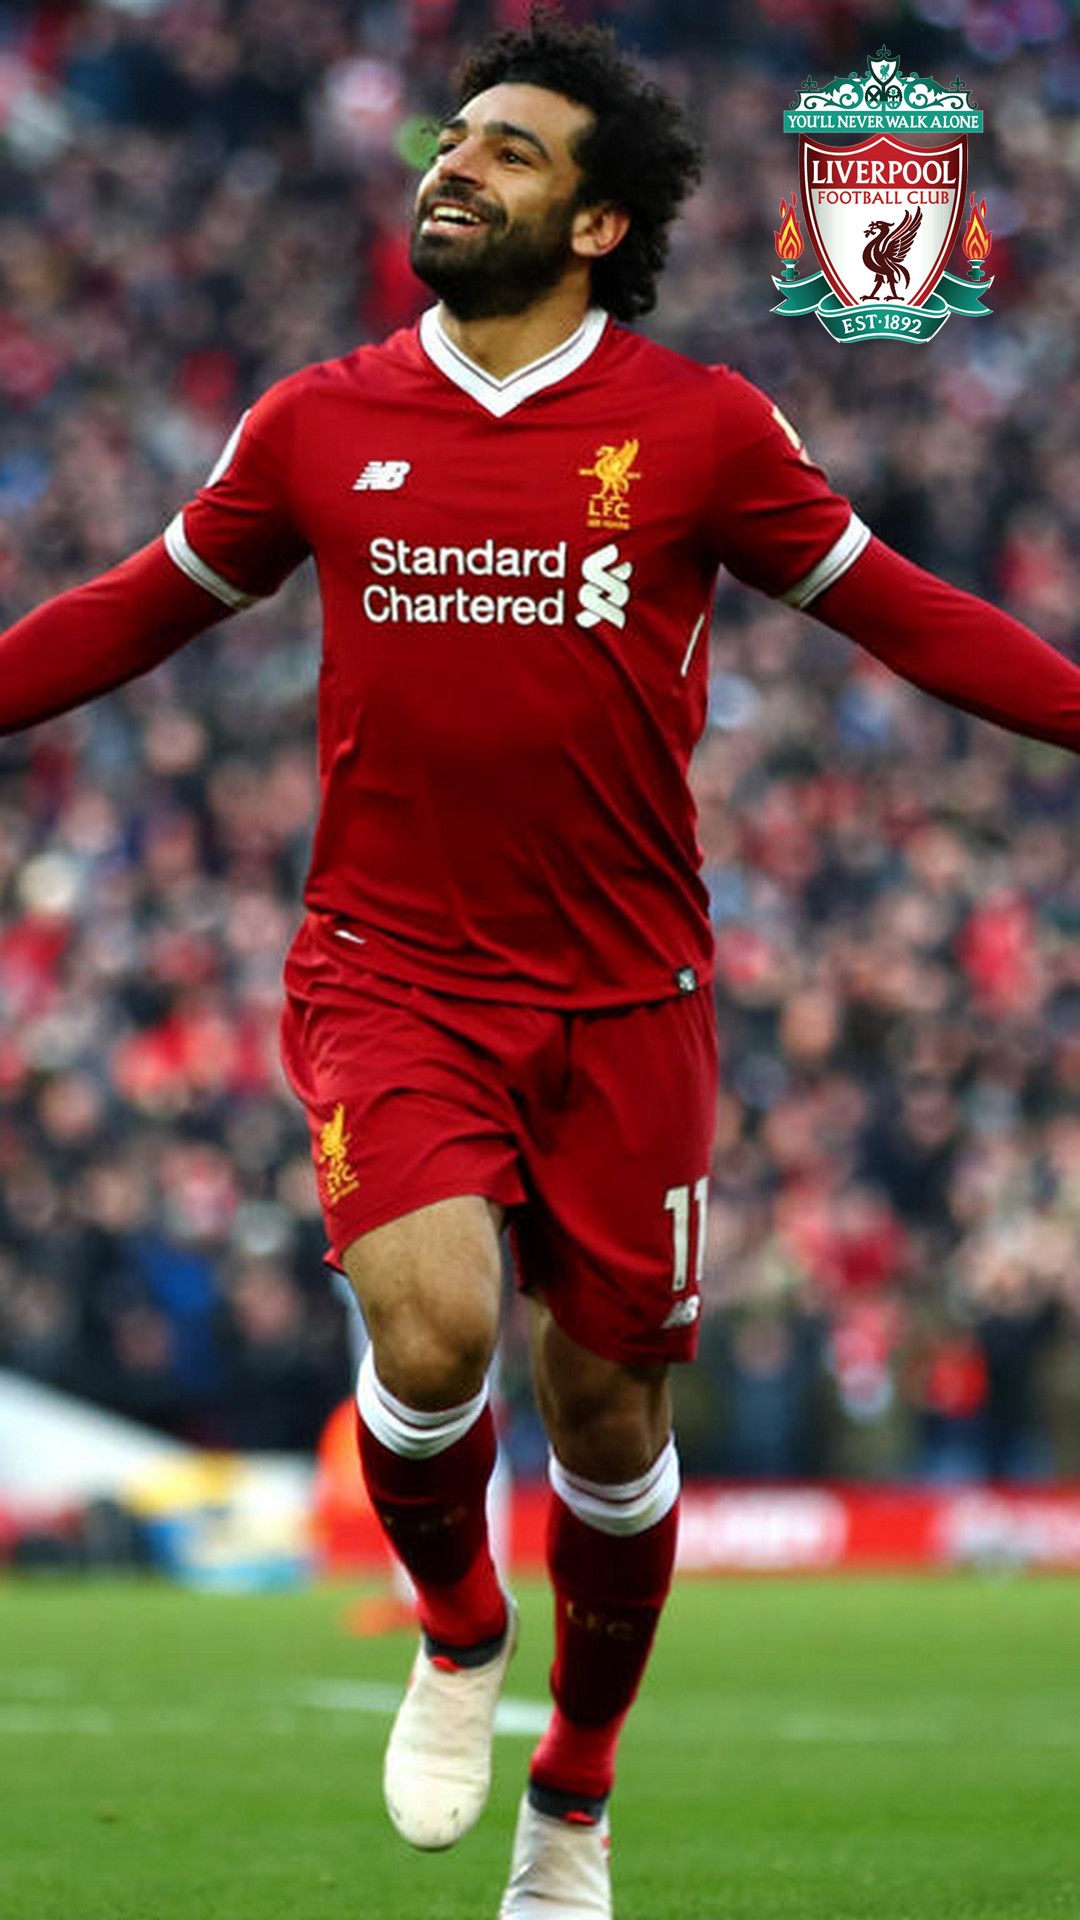 Liverpool Mohamed Salah Wallpaper For iPhone with resolution 1080X1920 pixel. You can make this wallpaper for your iPhone 5, 6, 7, 8, X backgrounds, Mobile Screensaver, or iPad Lock Screen